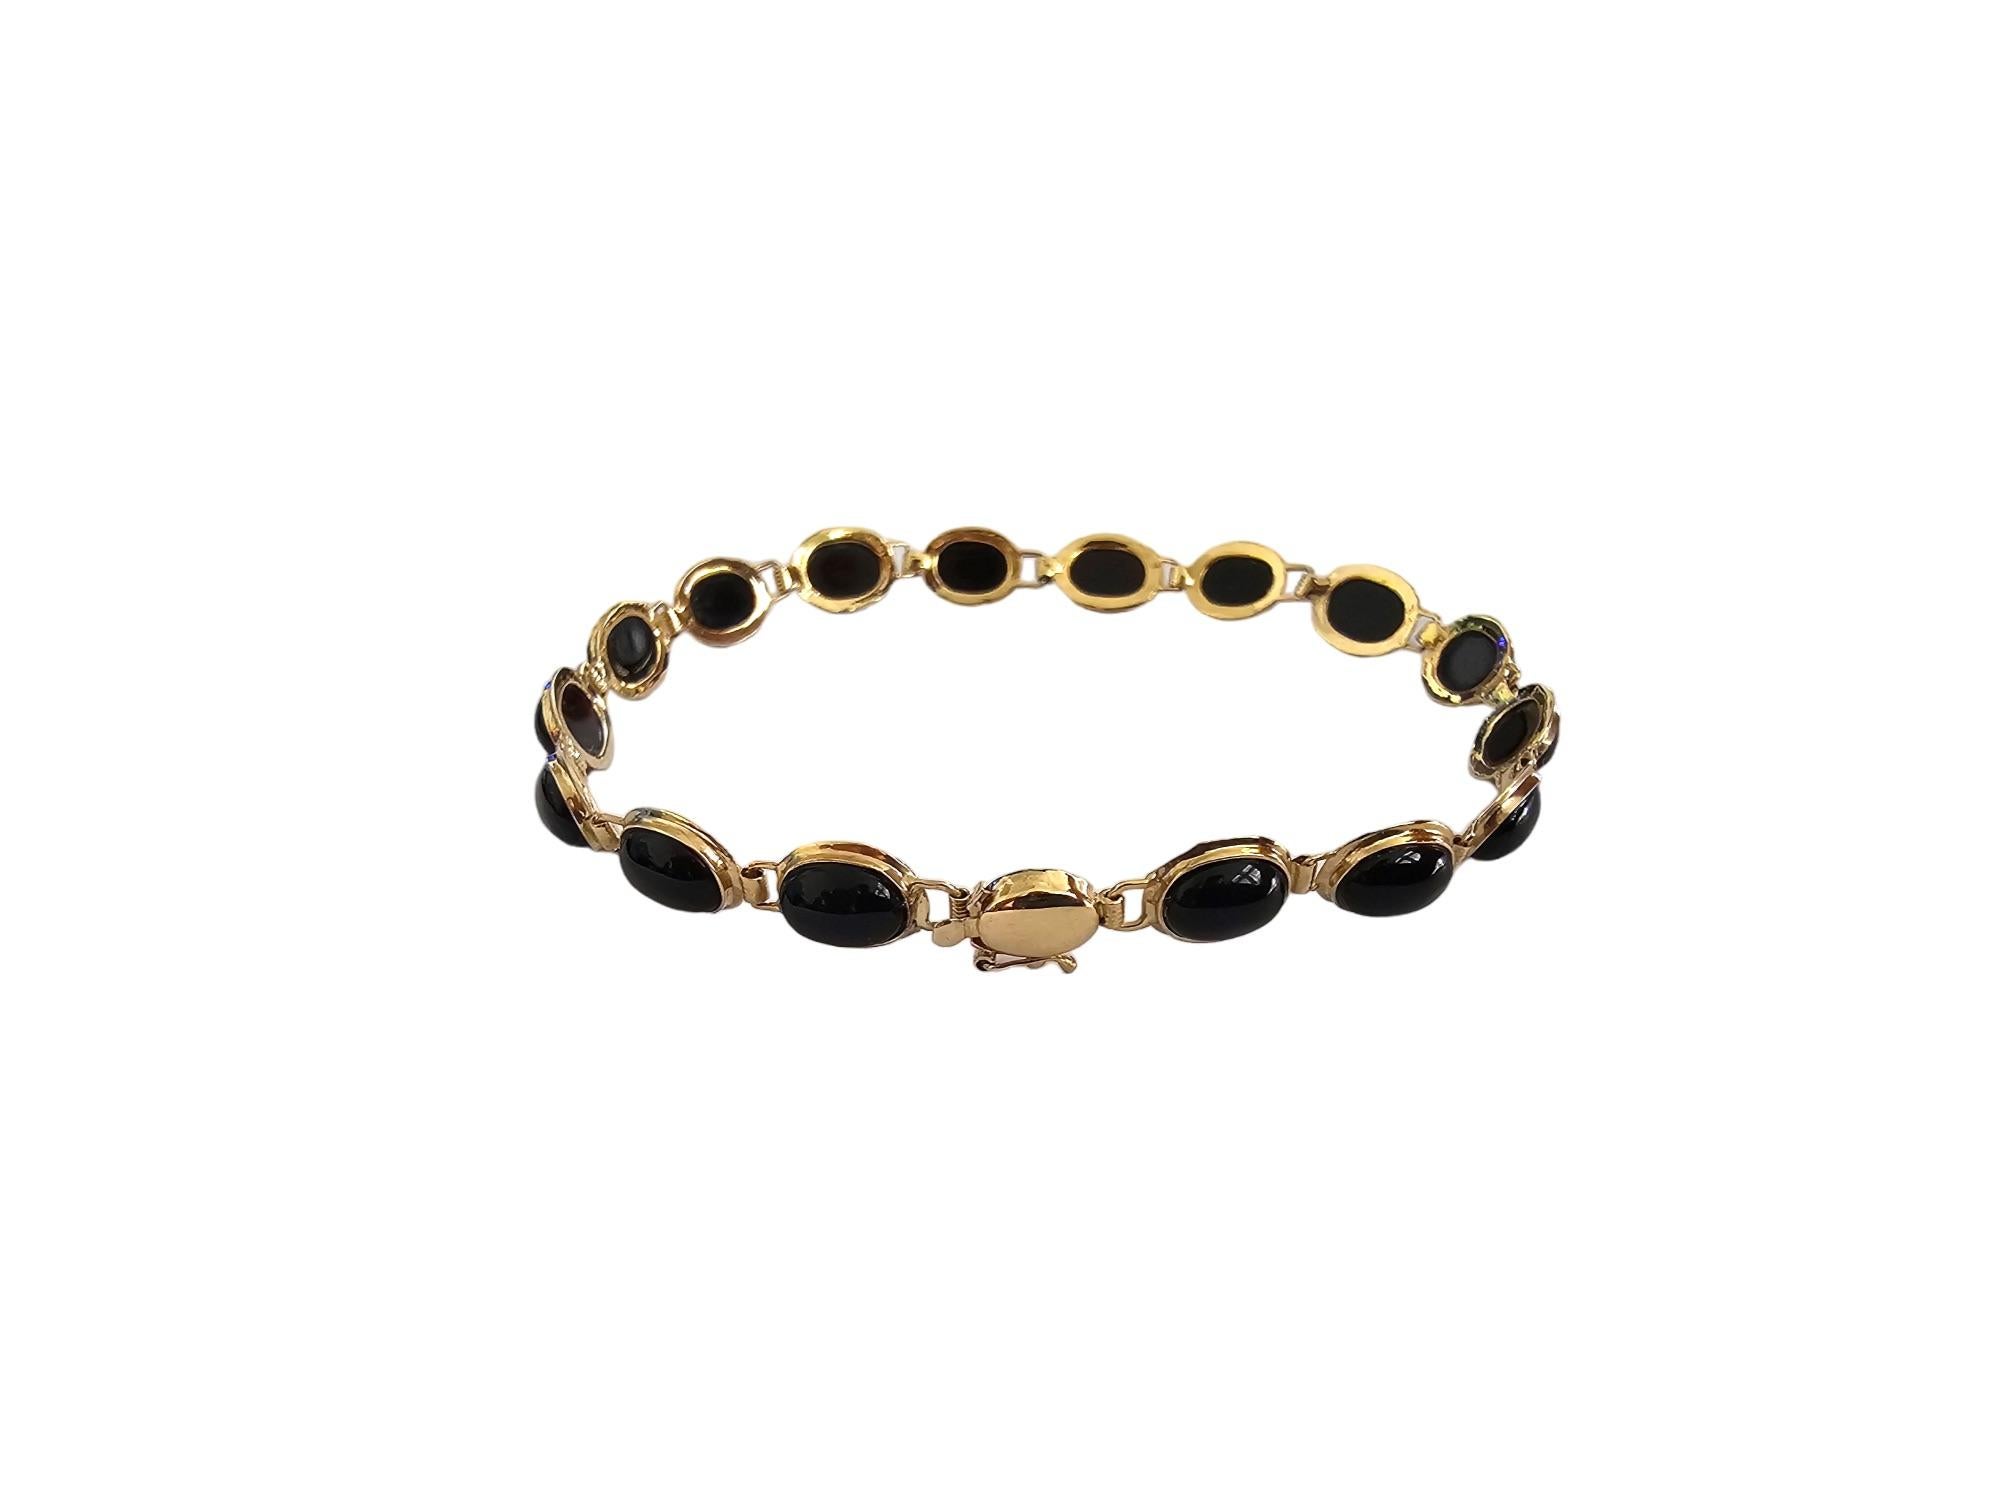 The 'Tibetan Black Onyx Bracelet' takes inspiration from the tallest mountain range in the world. Where the peaks of Black Onyx are counter-balanced by the valleys, portrayed by the Gold links. This Onyx variant portrays winter in the Himalayan